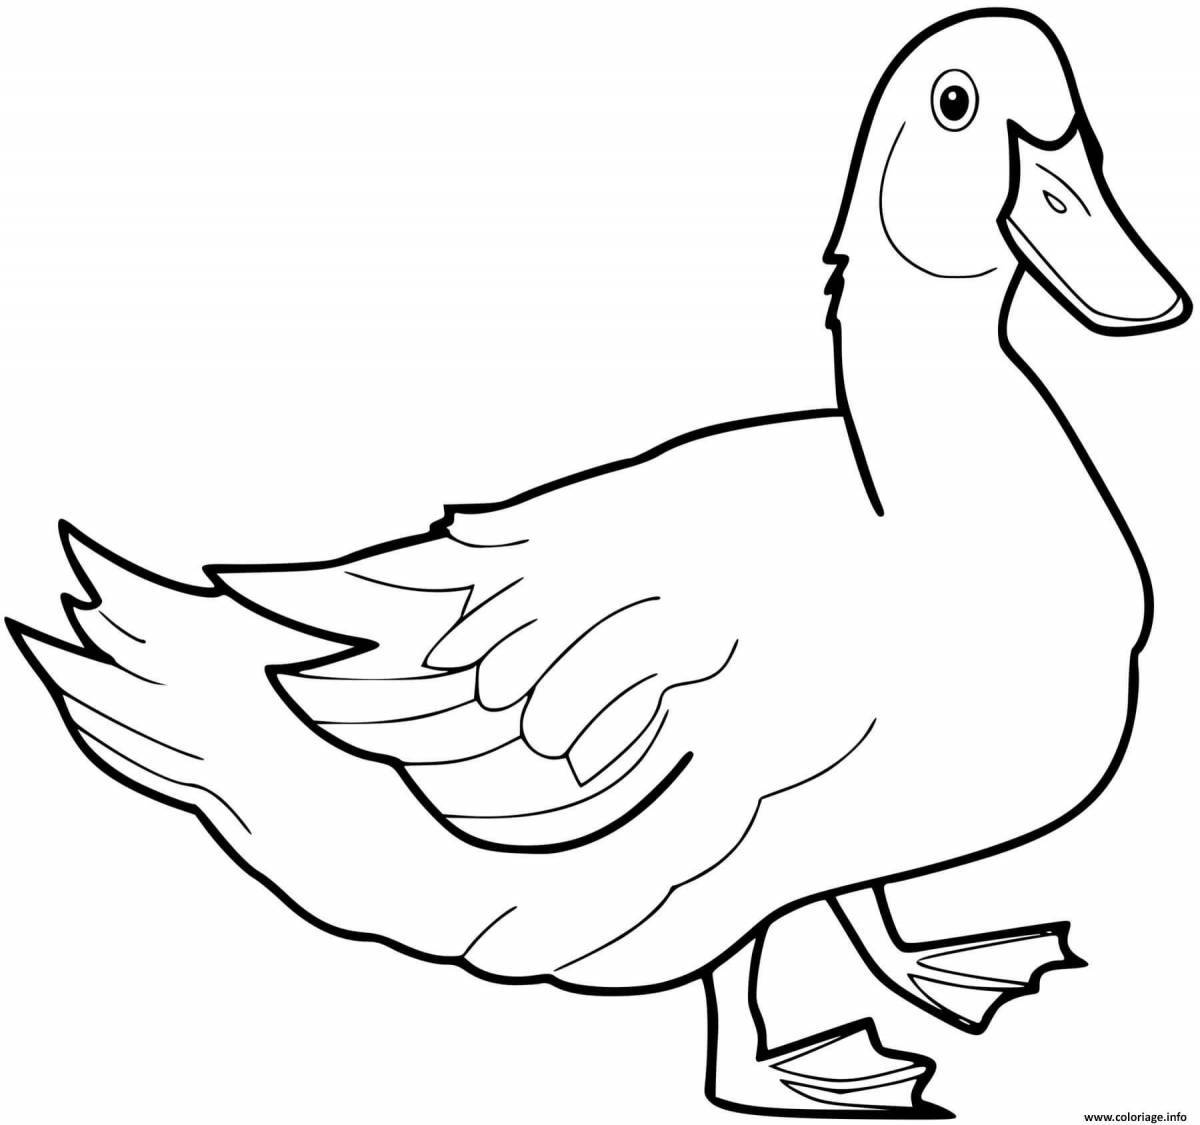 Playable lalaphan duck coloring book